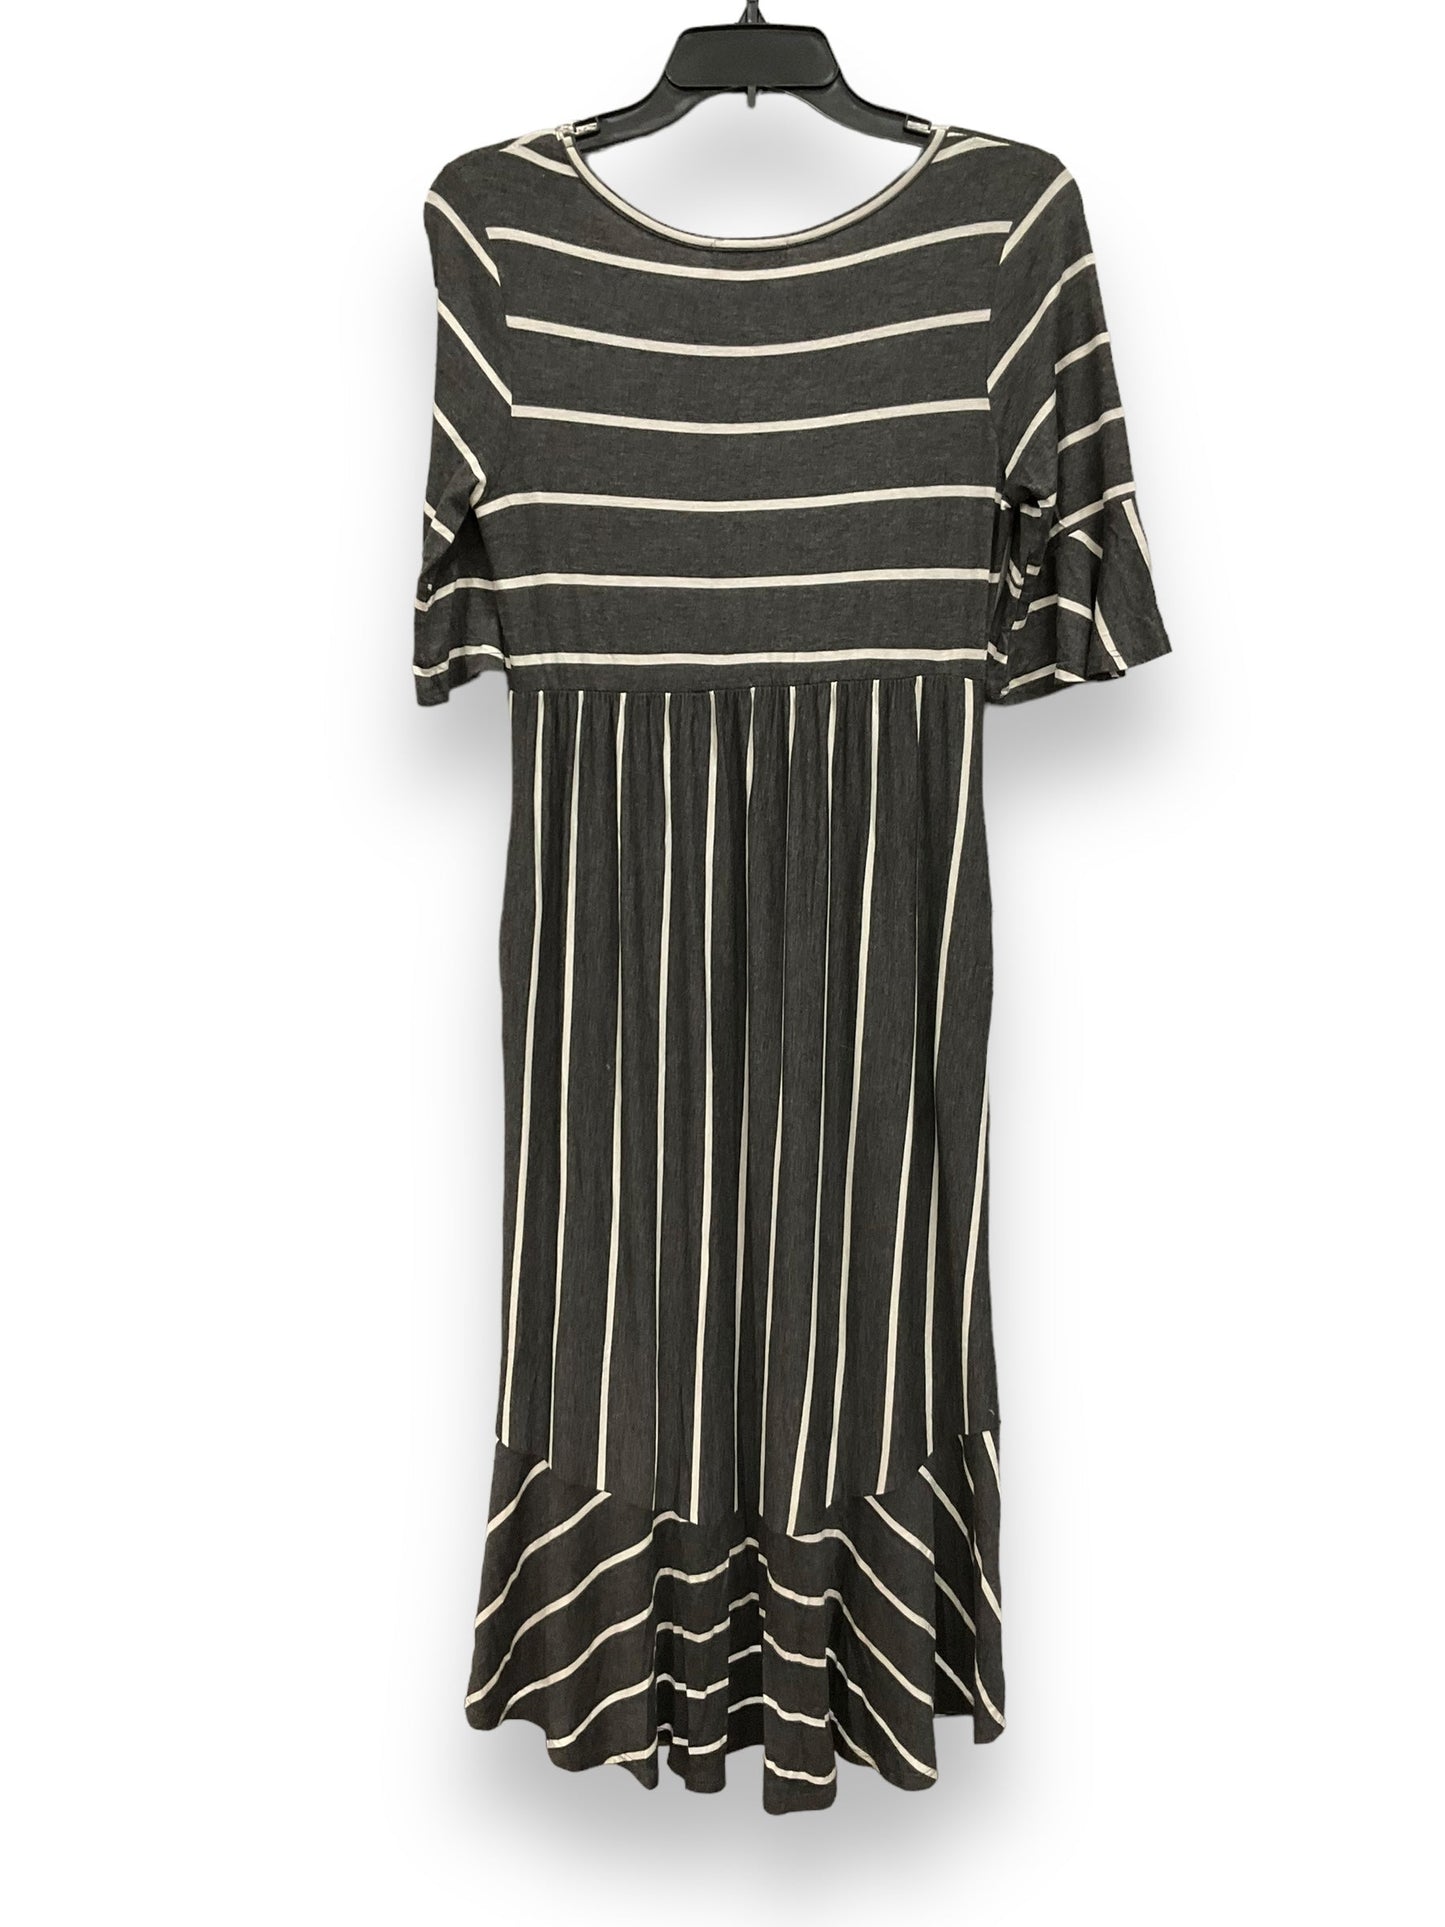 Striped Pattern Dress Casual Midi Clothes Mentor, Size M